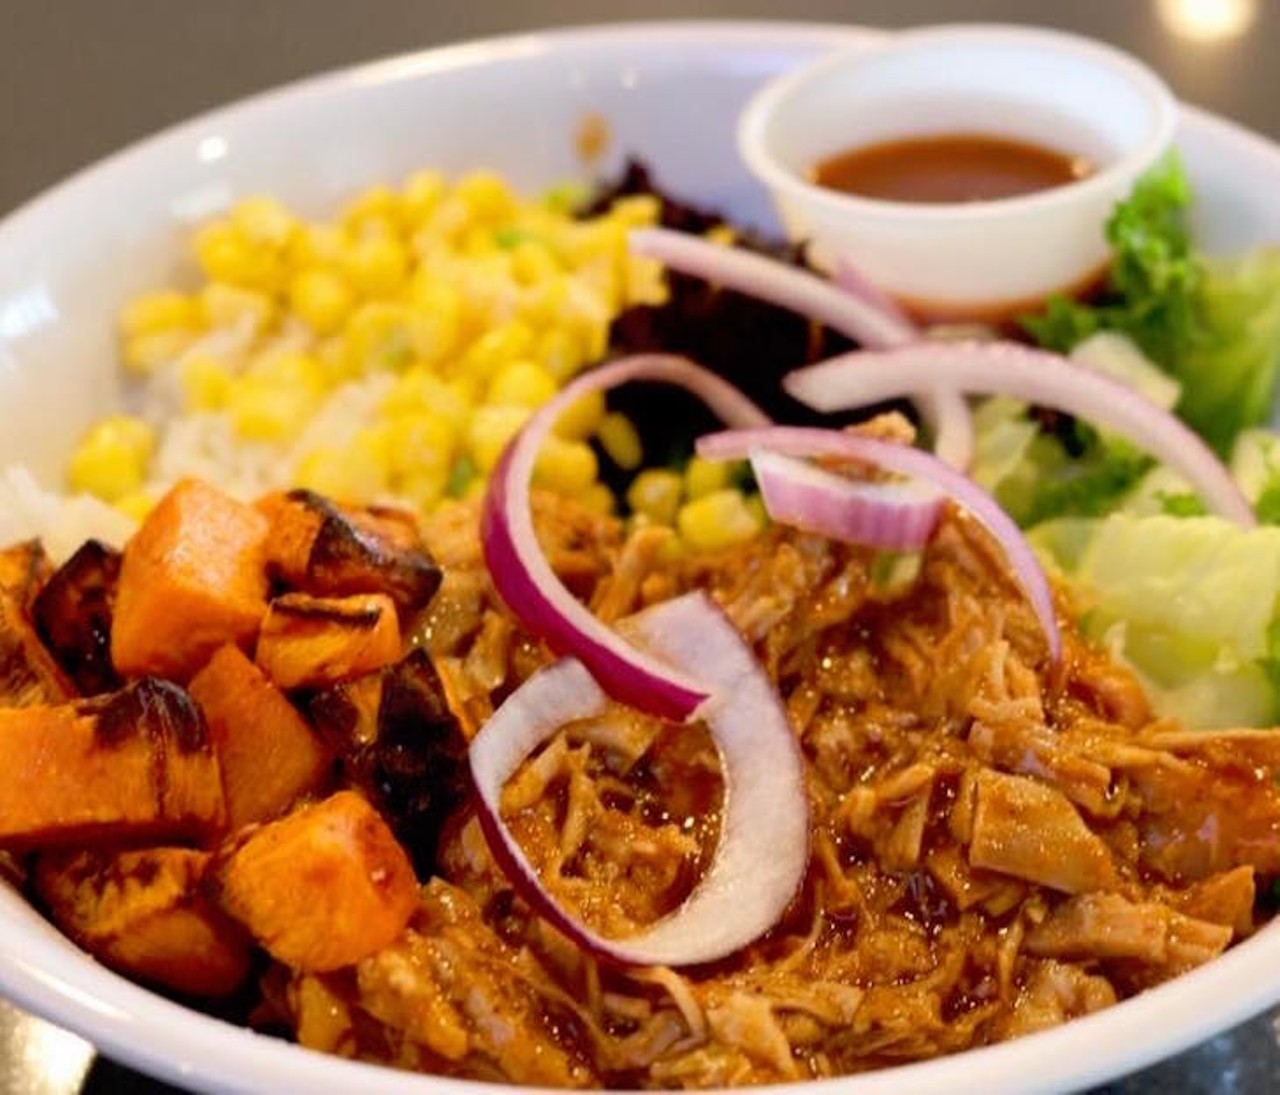 Must  try: The sweet potato and pineapple BBQ sauce Luau Pork bowl is one of Too Much Sauce&#146;s more savory options for when you want to pig out and eat healthy.
Photo via sauceorlando/Instagram